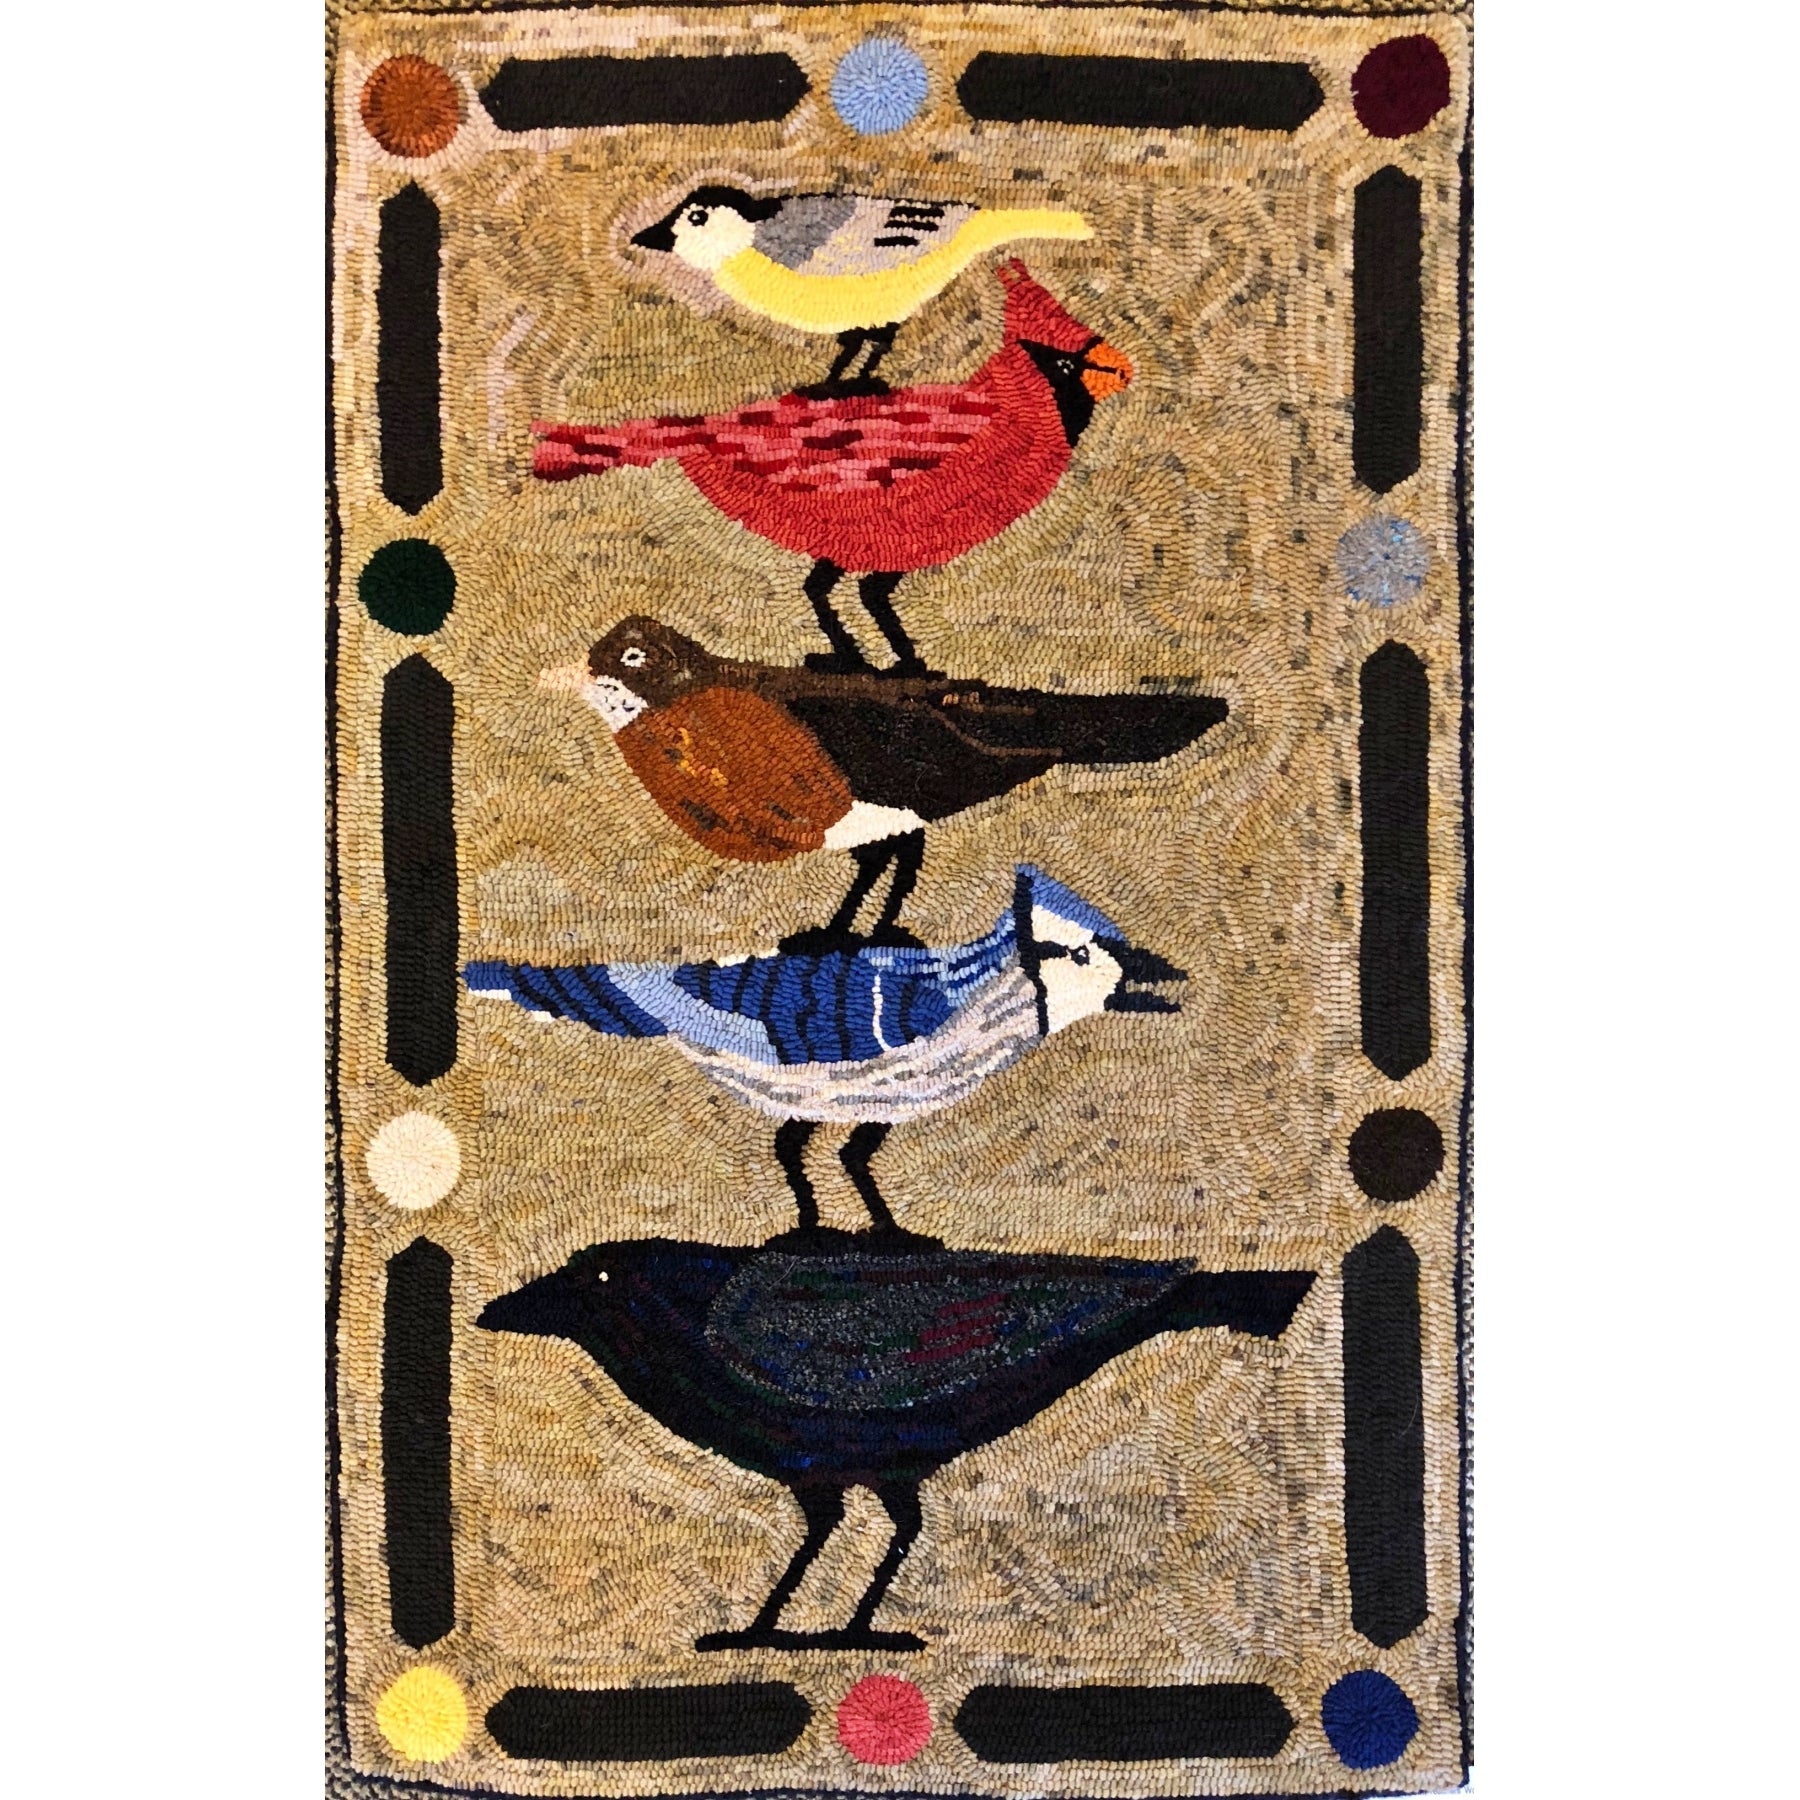 Not of a Feather, rug hooked by Sondra Kellar